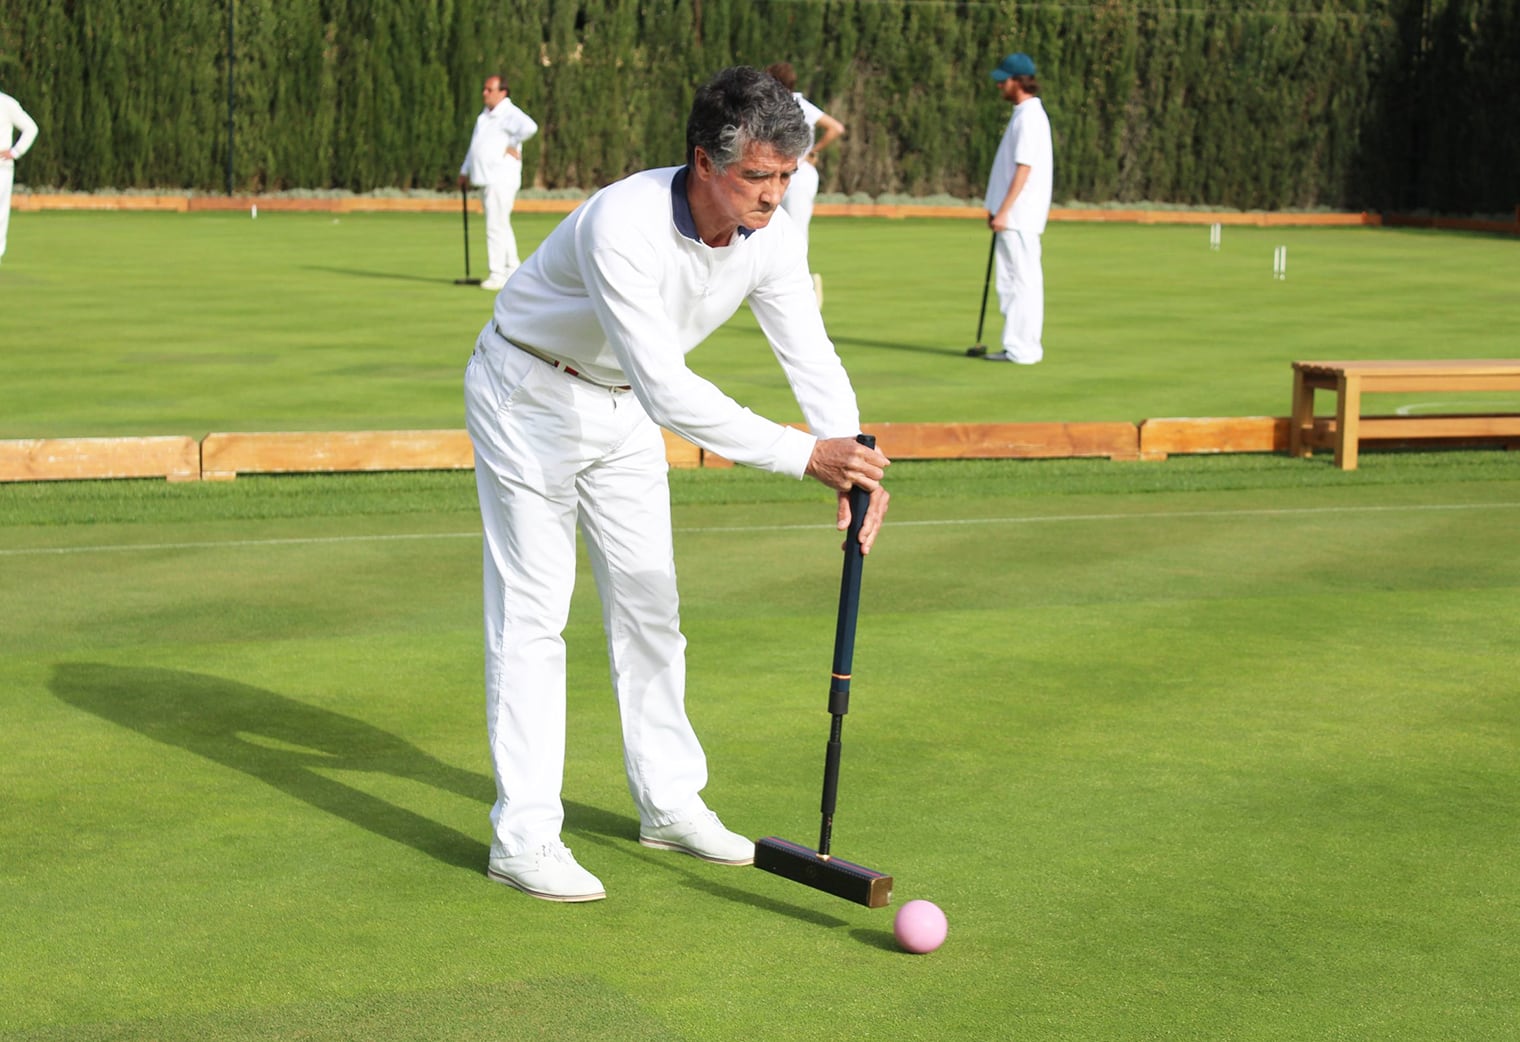 Juan Carlos, croquet mallet maker on the playing field